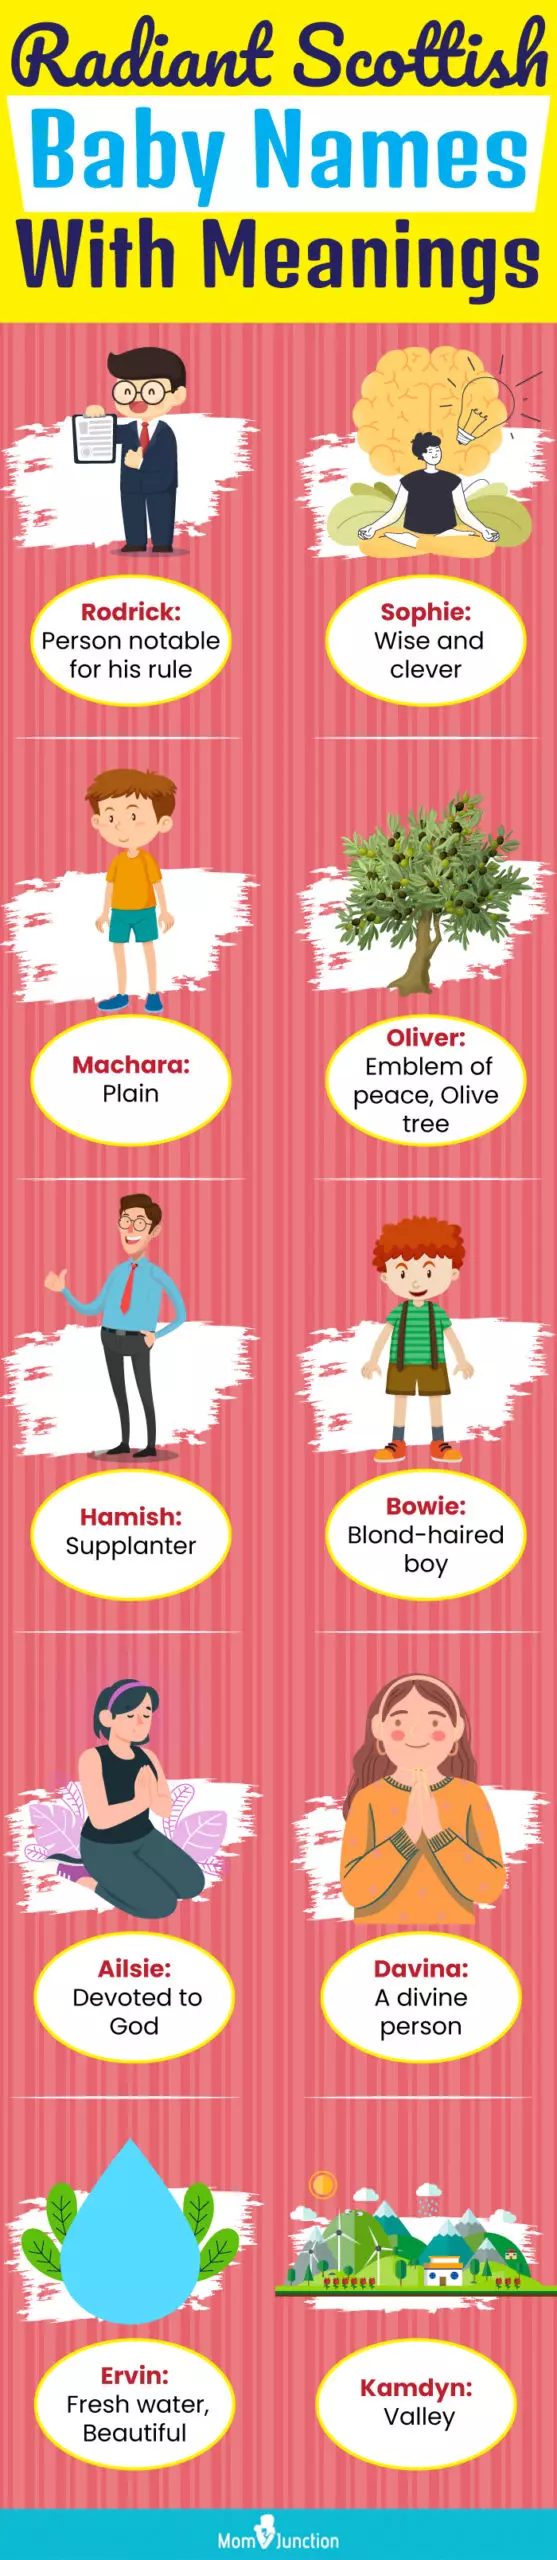 radiant scottish baby names with meanings (infographic)